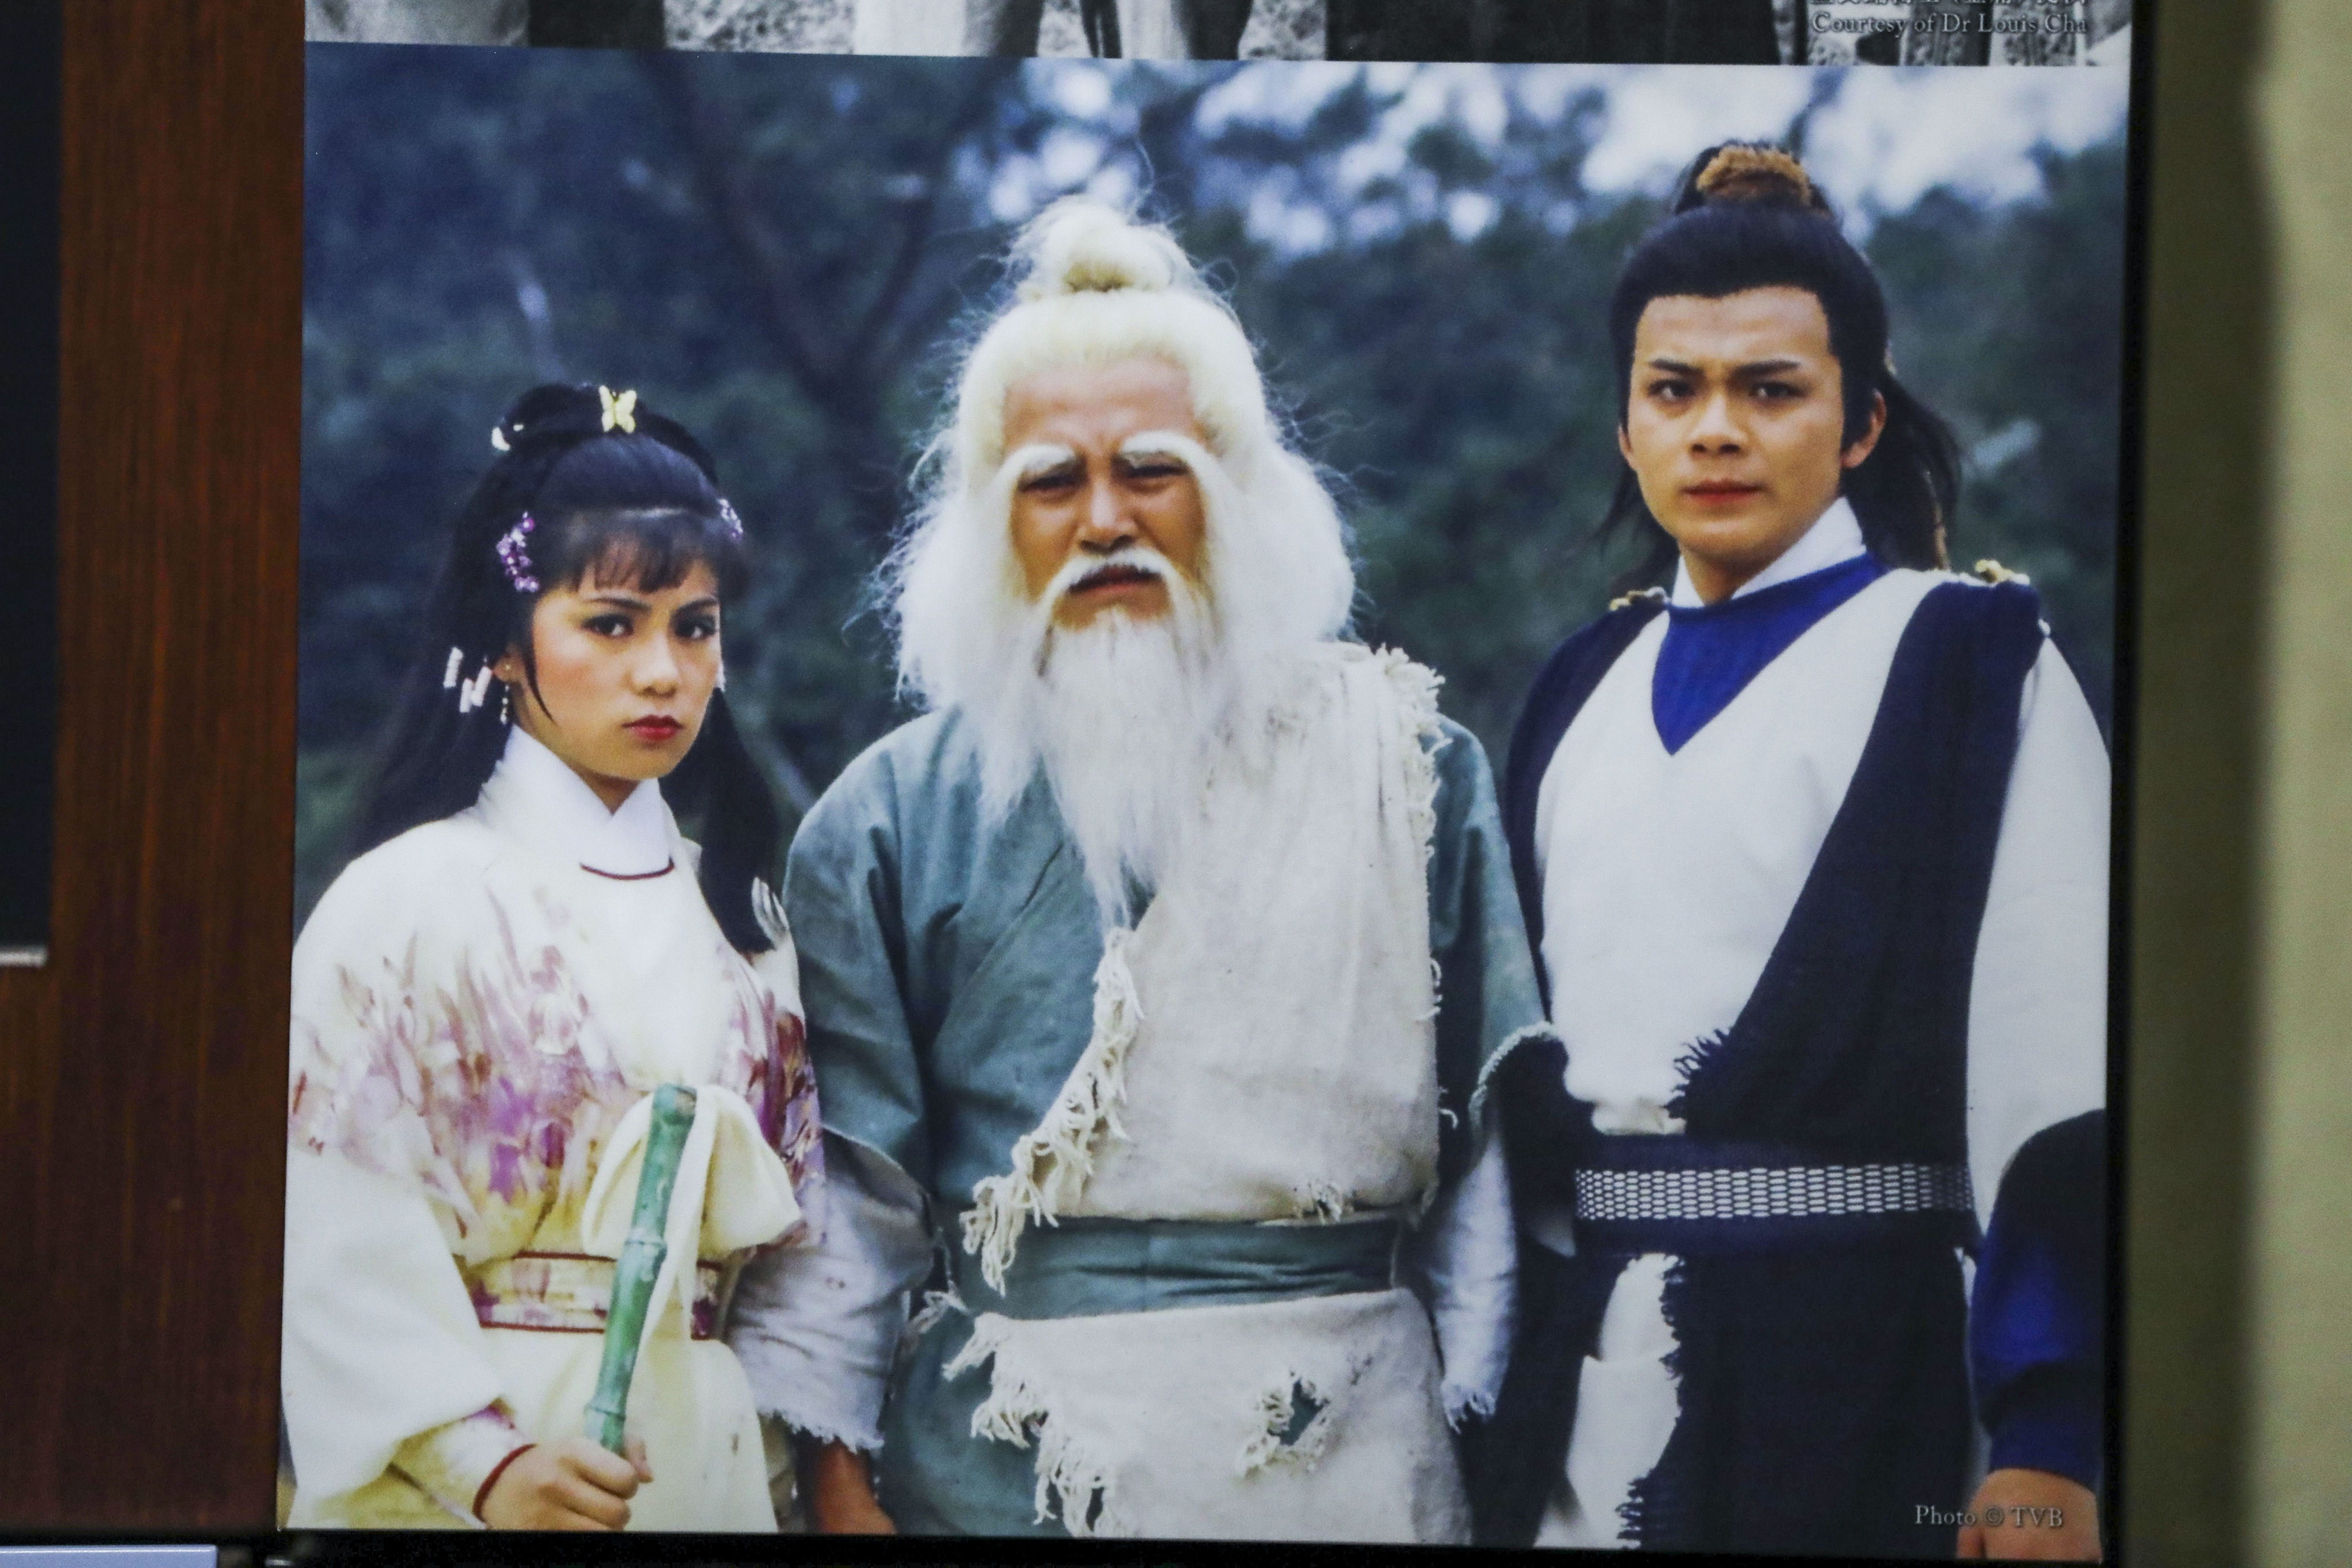 A picture of Barbara Yung, Lau Dan and Felix Wong, in character as Huang Rong, Hong Qigong and Guo Jing in TVB’s The Legend of the Condor Heroes, is shown at the Jin Yong Gallery at the Hong Kong Heritage Museum in Sha Tin in 2018. Photo: Nora Tam 